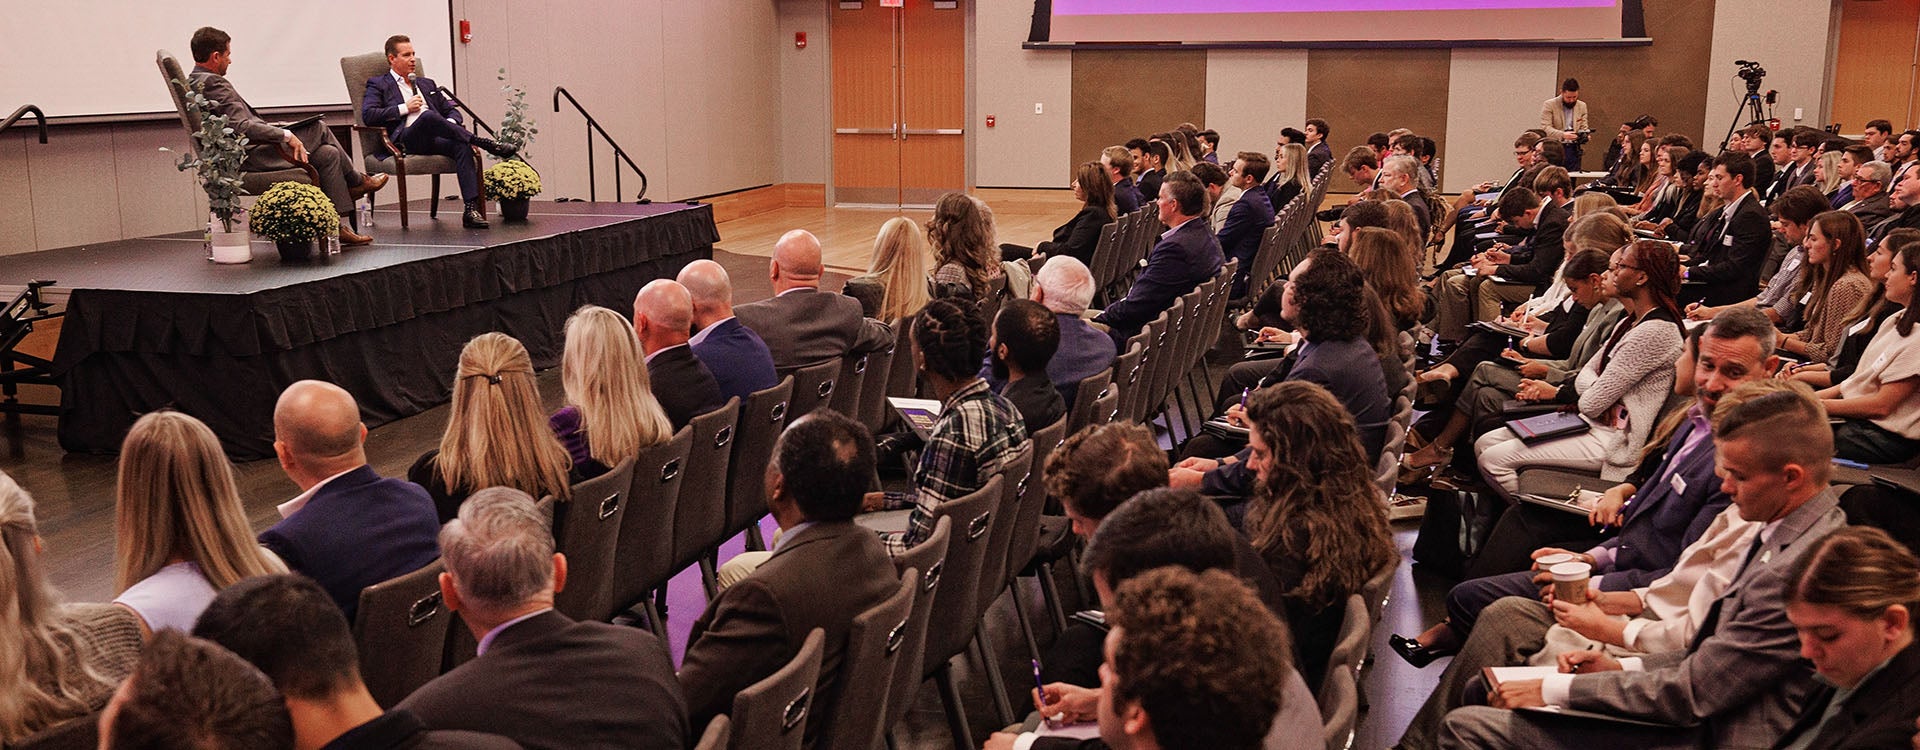 More than 1,200 students, alumni and presenters attended the annual business leadership conference organized by East Carolina University’s College of Business.